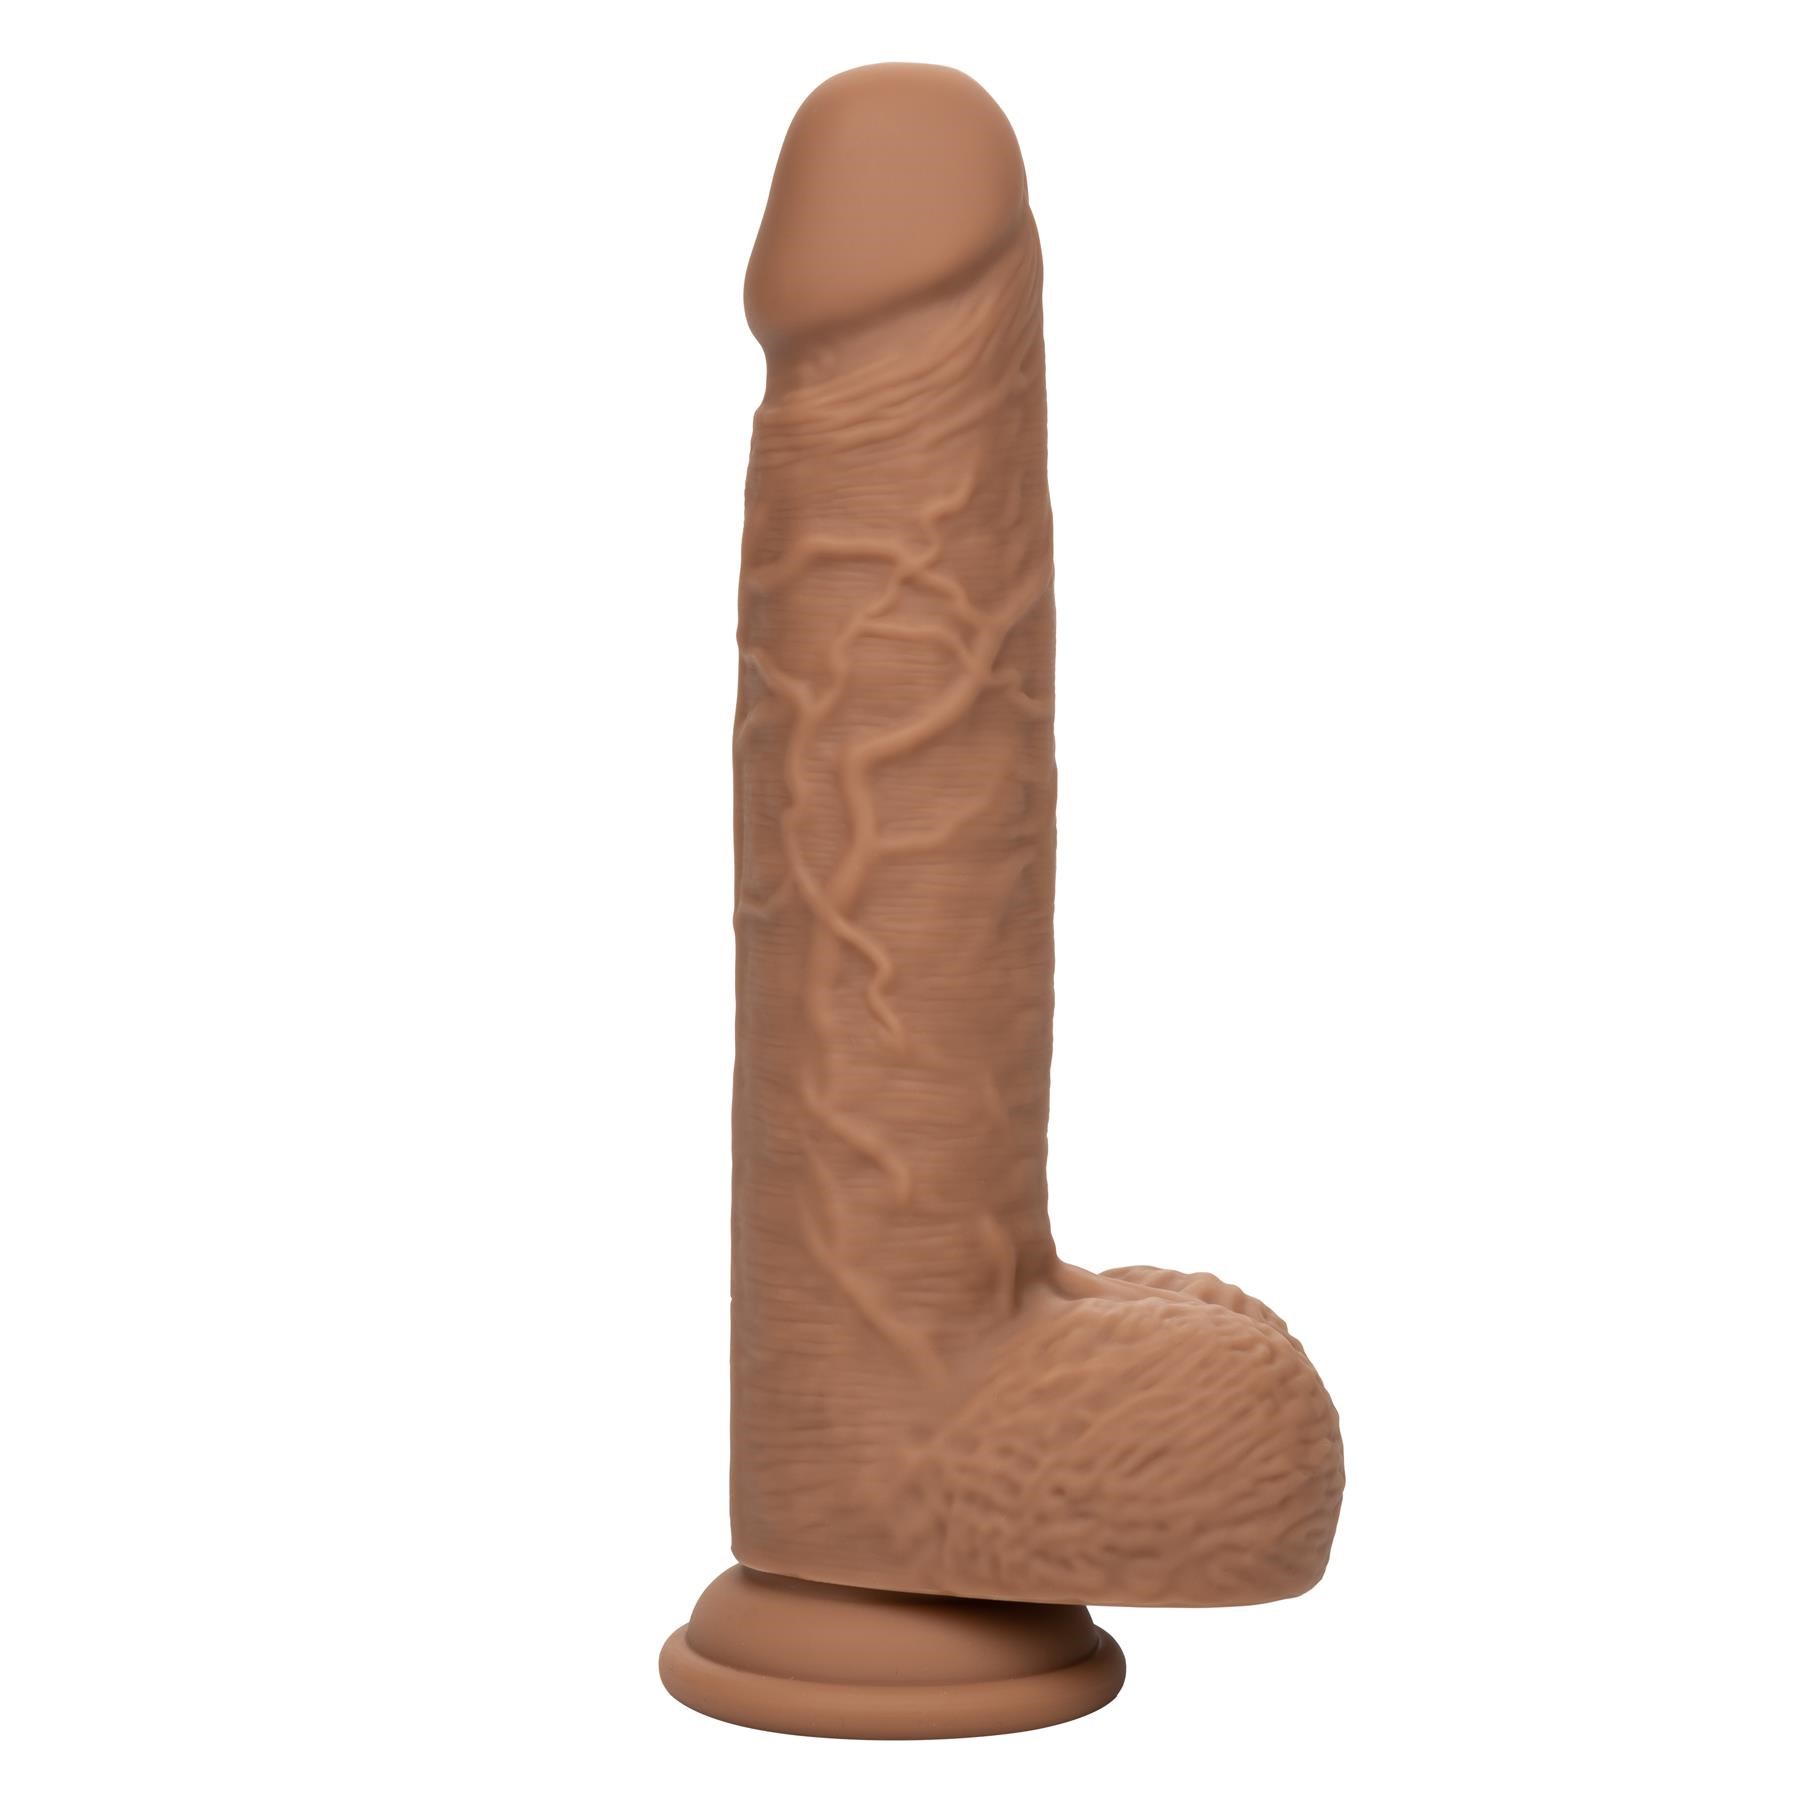 F*ck Stick Squirting and Vibrating Dildo- Product Shot #1 - Brown